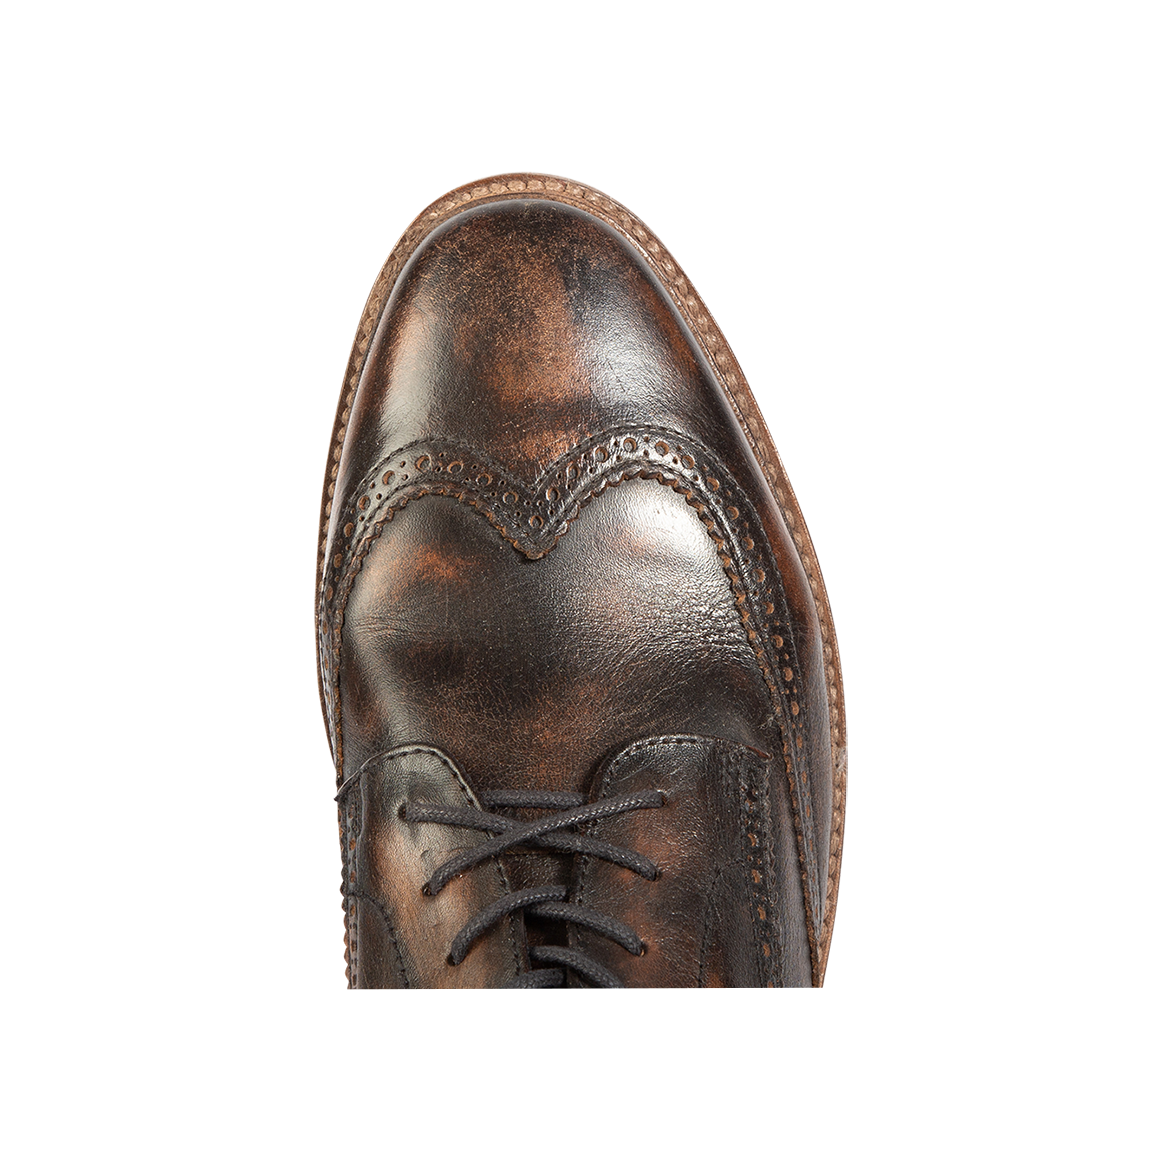 Top view showing wingtip toe and loafer construction on FREEBIRD men's Kensington black distressed shoe